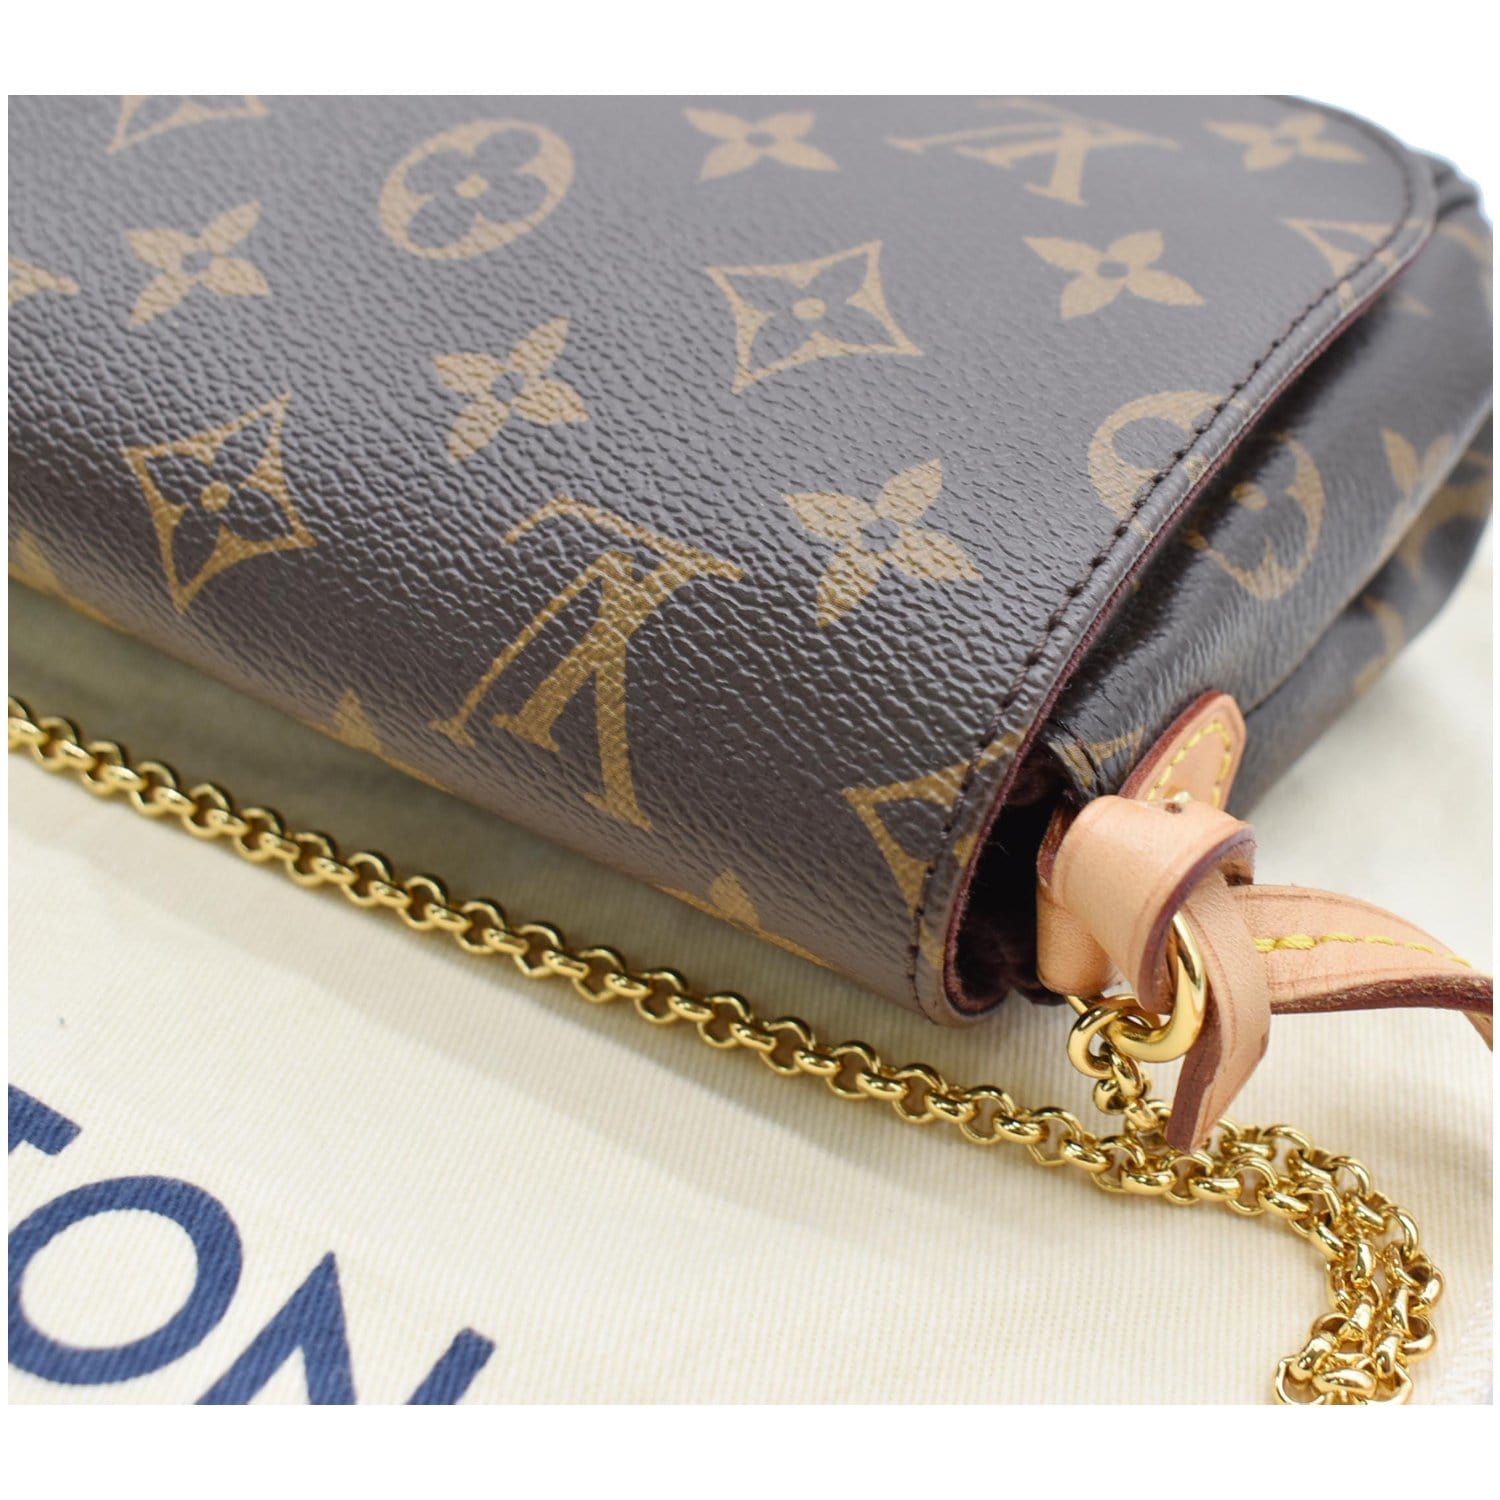 LOUIS VUITTON - TOILETRY pouch 26 - INSERT and STRAP OPTIONS from